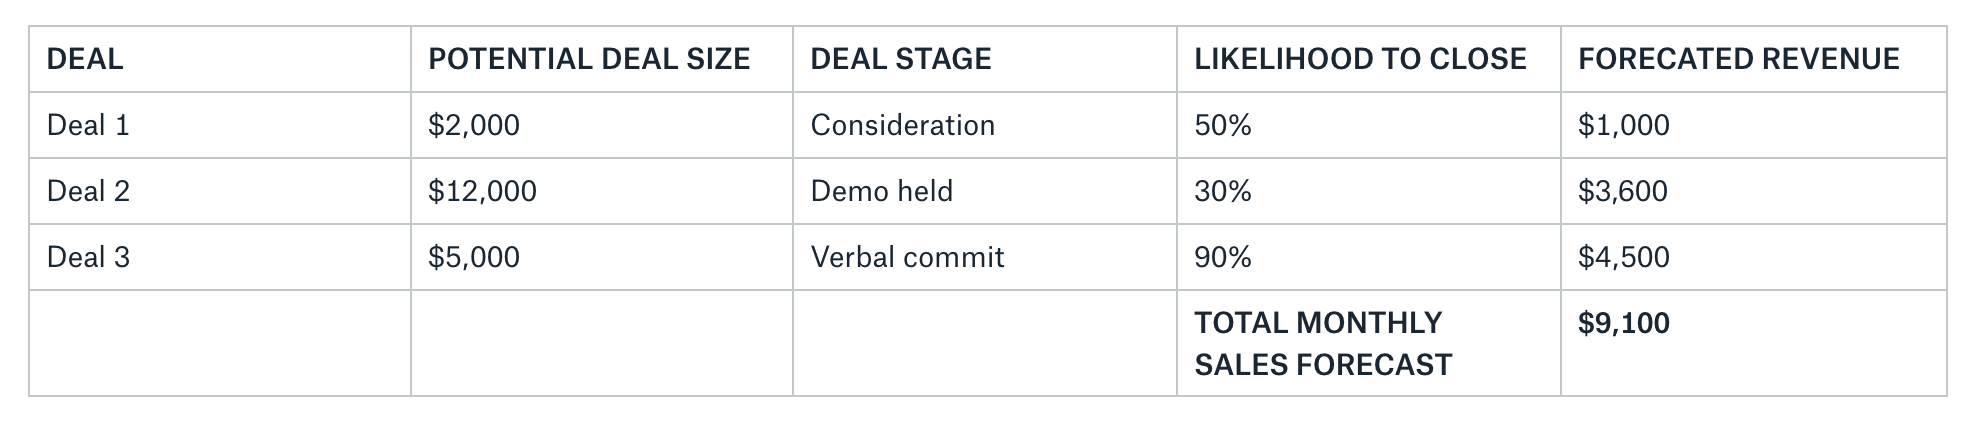 Assessing likelihood percentages by deal stage.